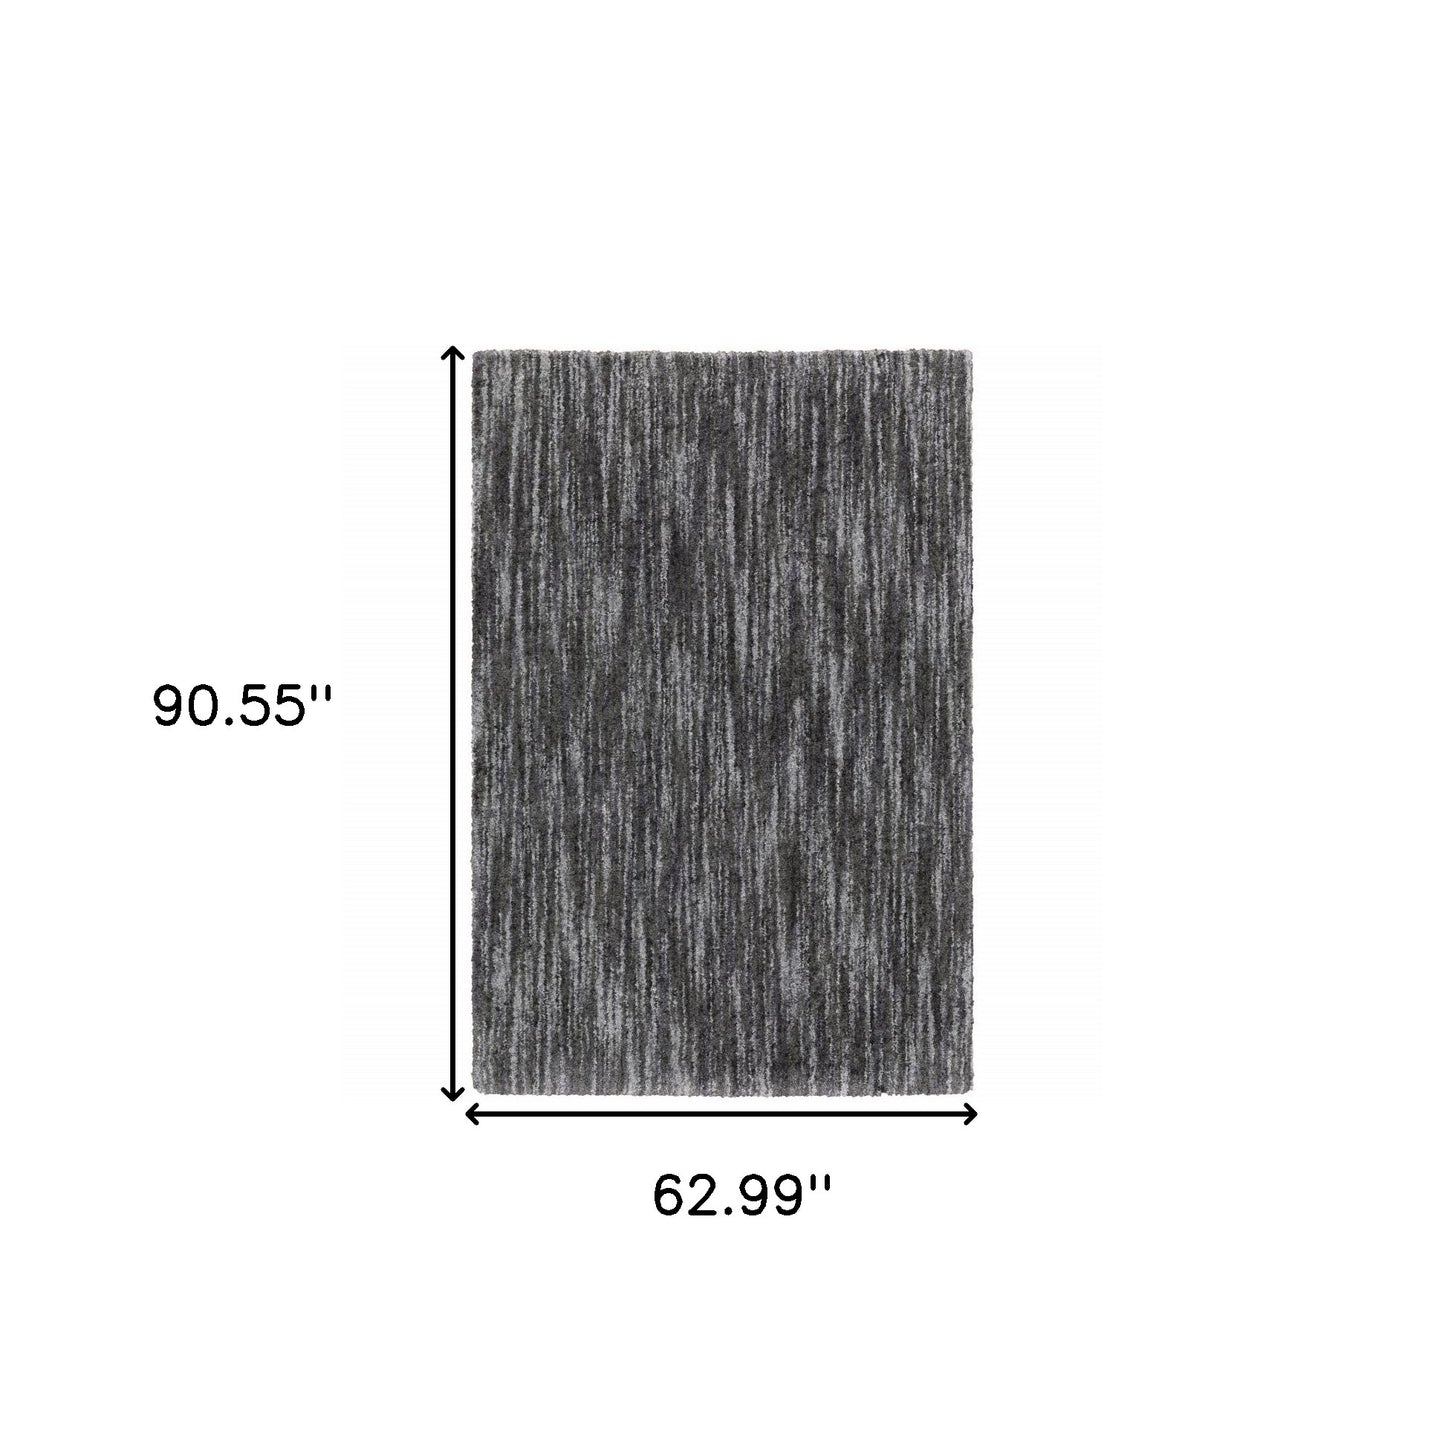 5' X 8' Charcoal Shag Power Loom Stain Resistant Area Rug